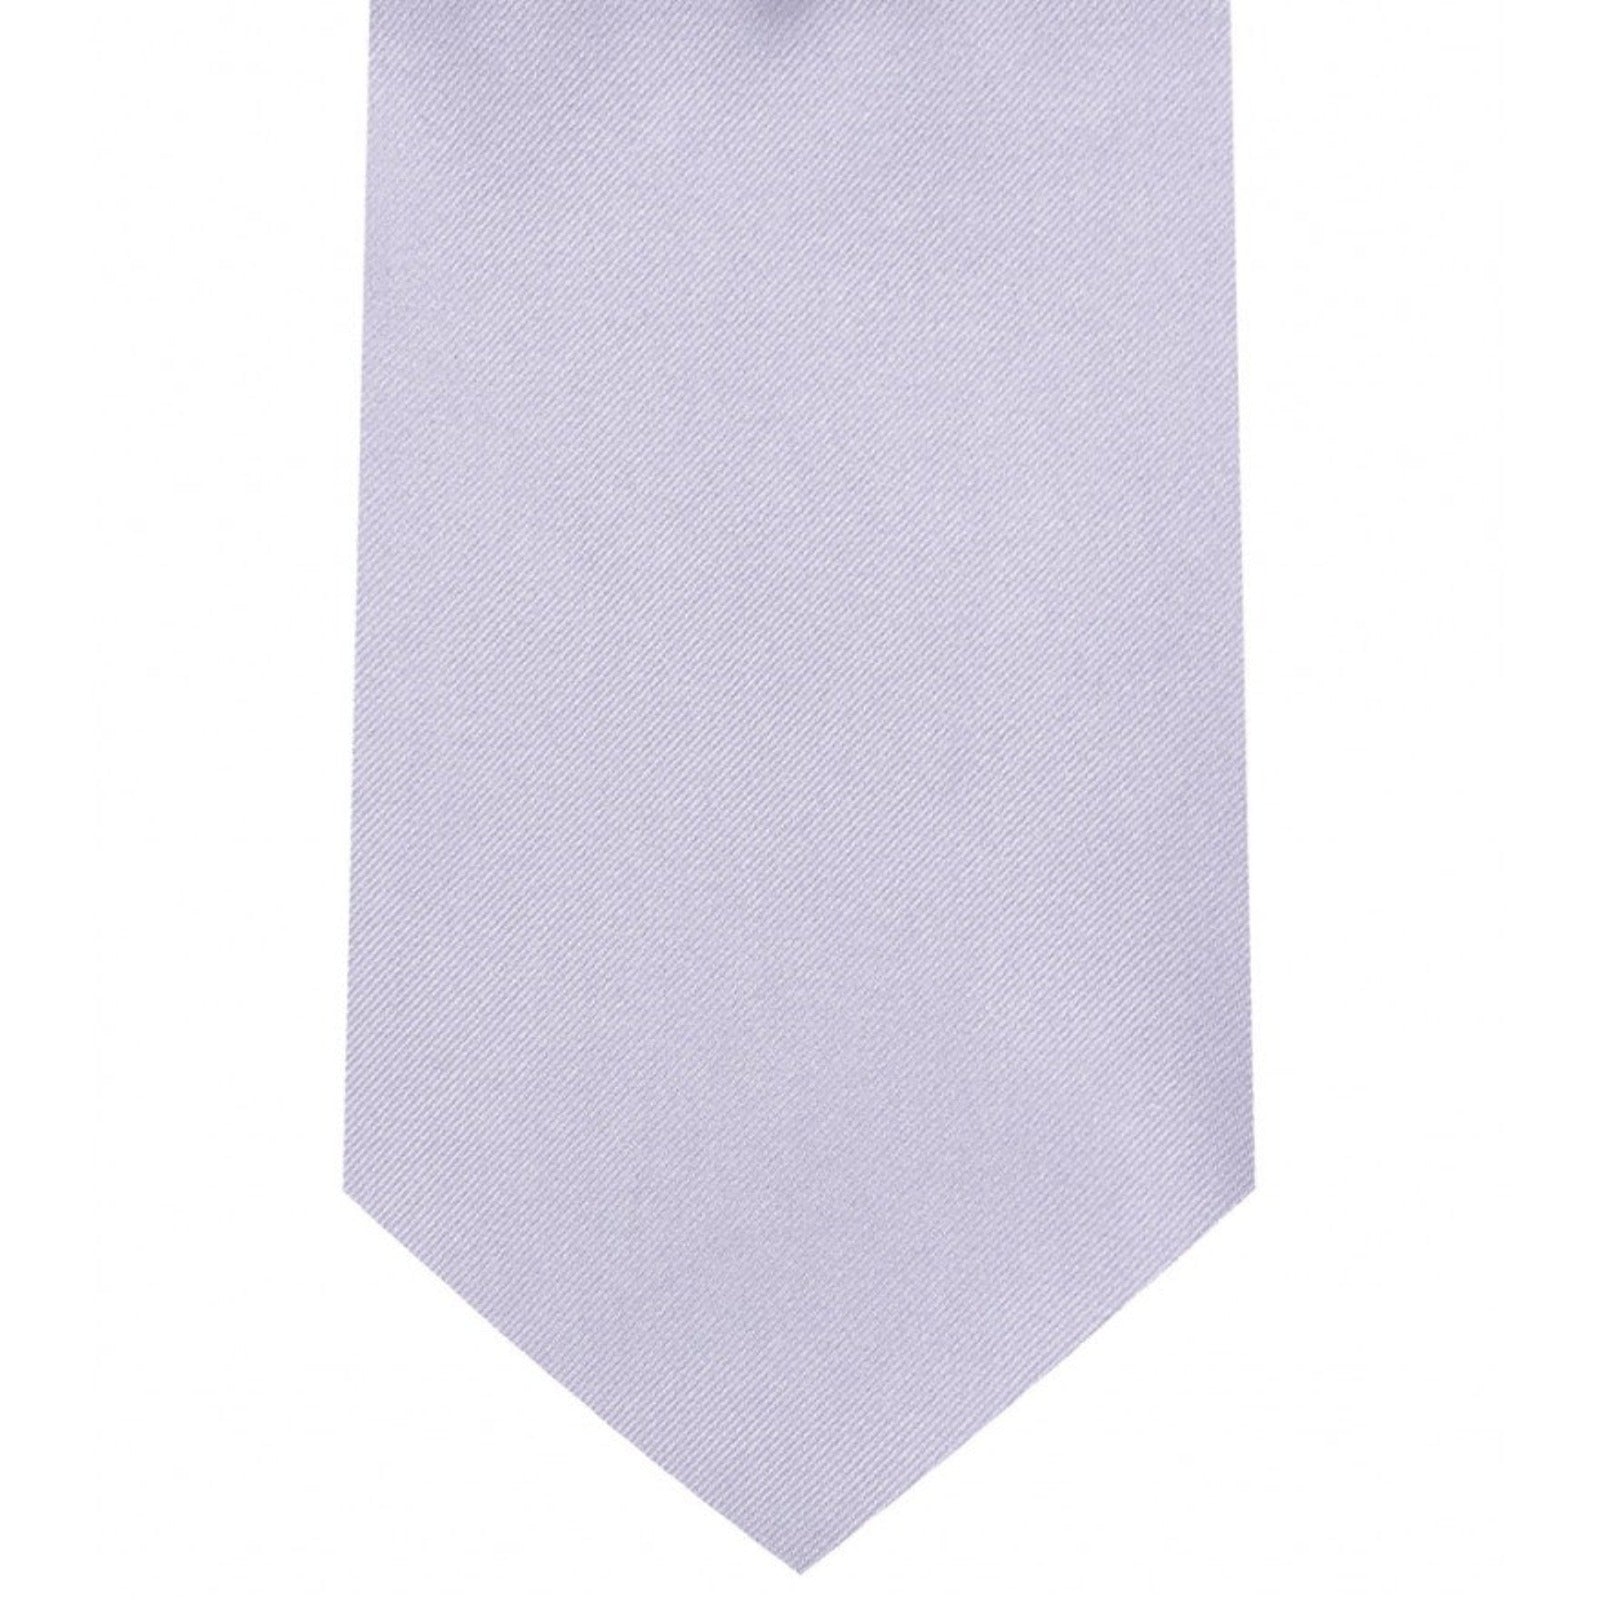 Classic Light Lilac Tie Regular width 3.5 inches With Matching Pocket Square | KCT Menswear